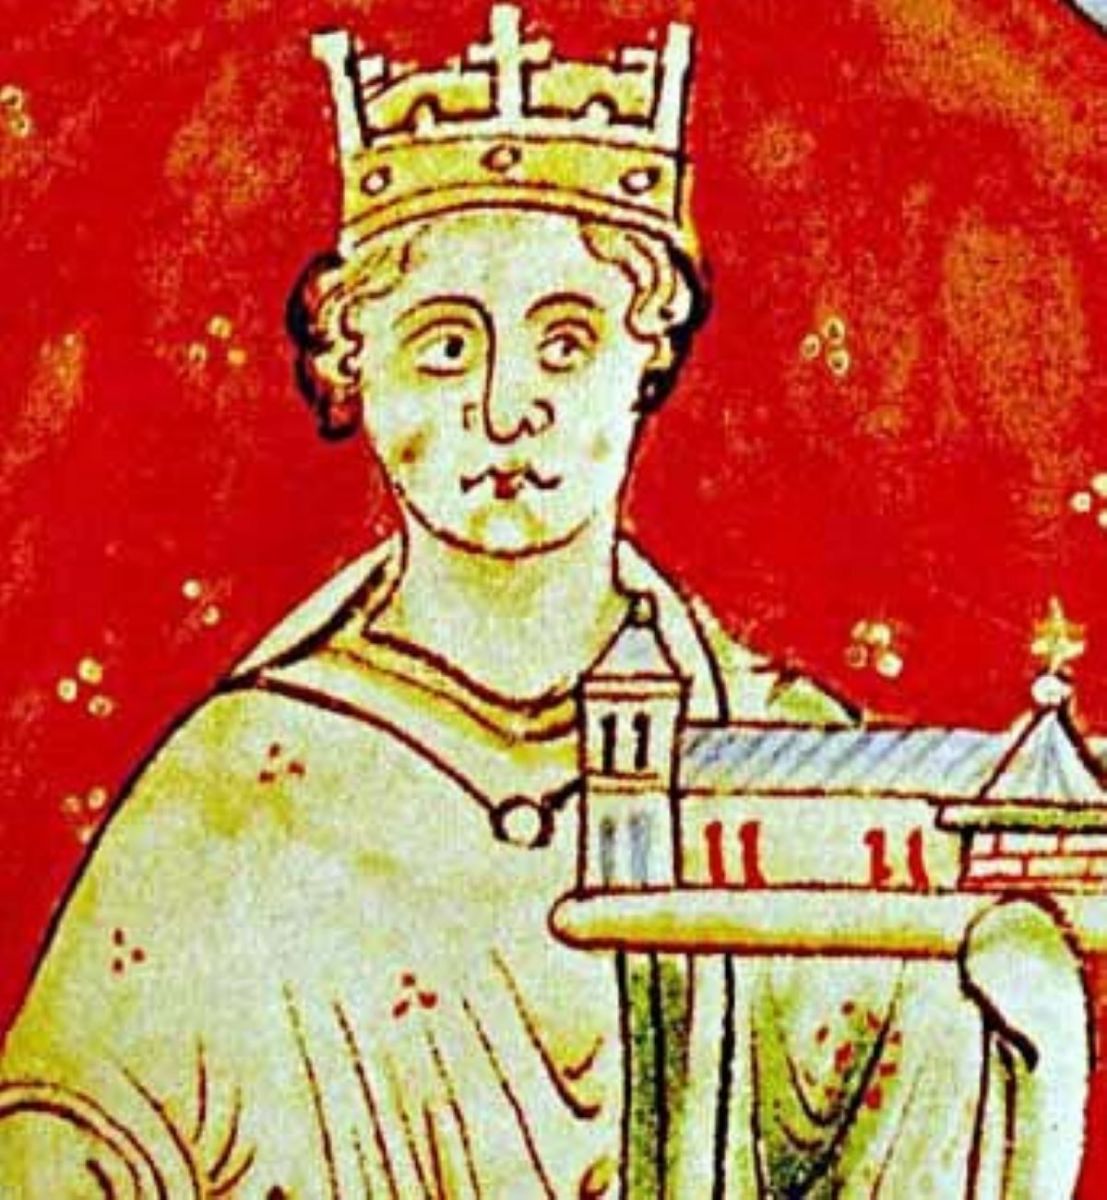 King John of England depicted in the 1250s Historia Anglorum.